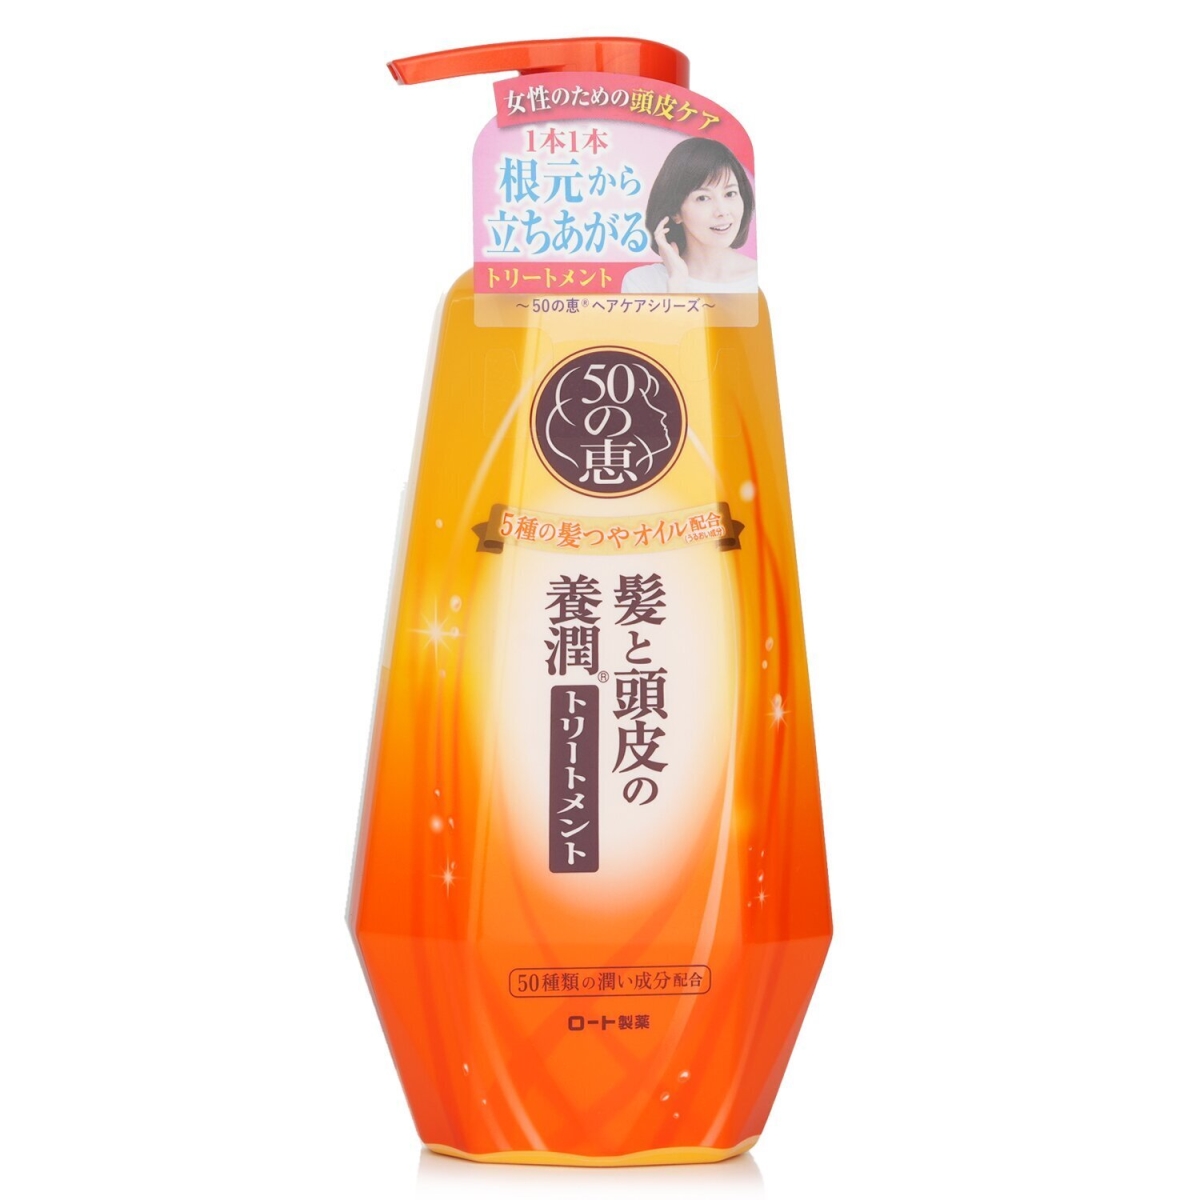 Picture of 50 Megumi 298598 400 ml Aging Hair Care Conditioner